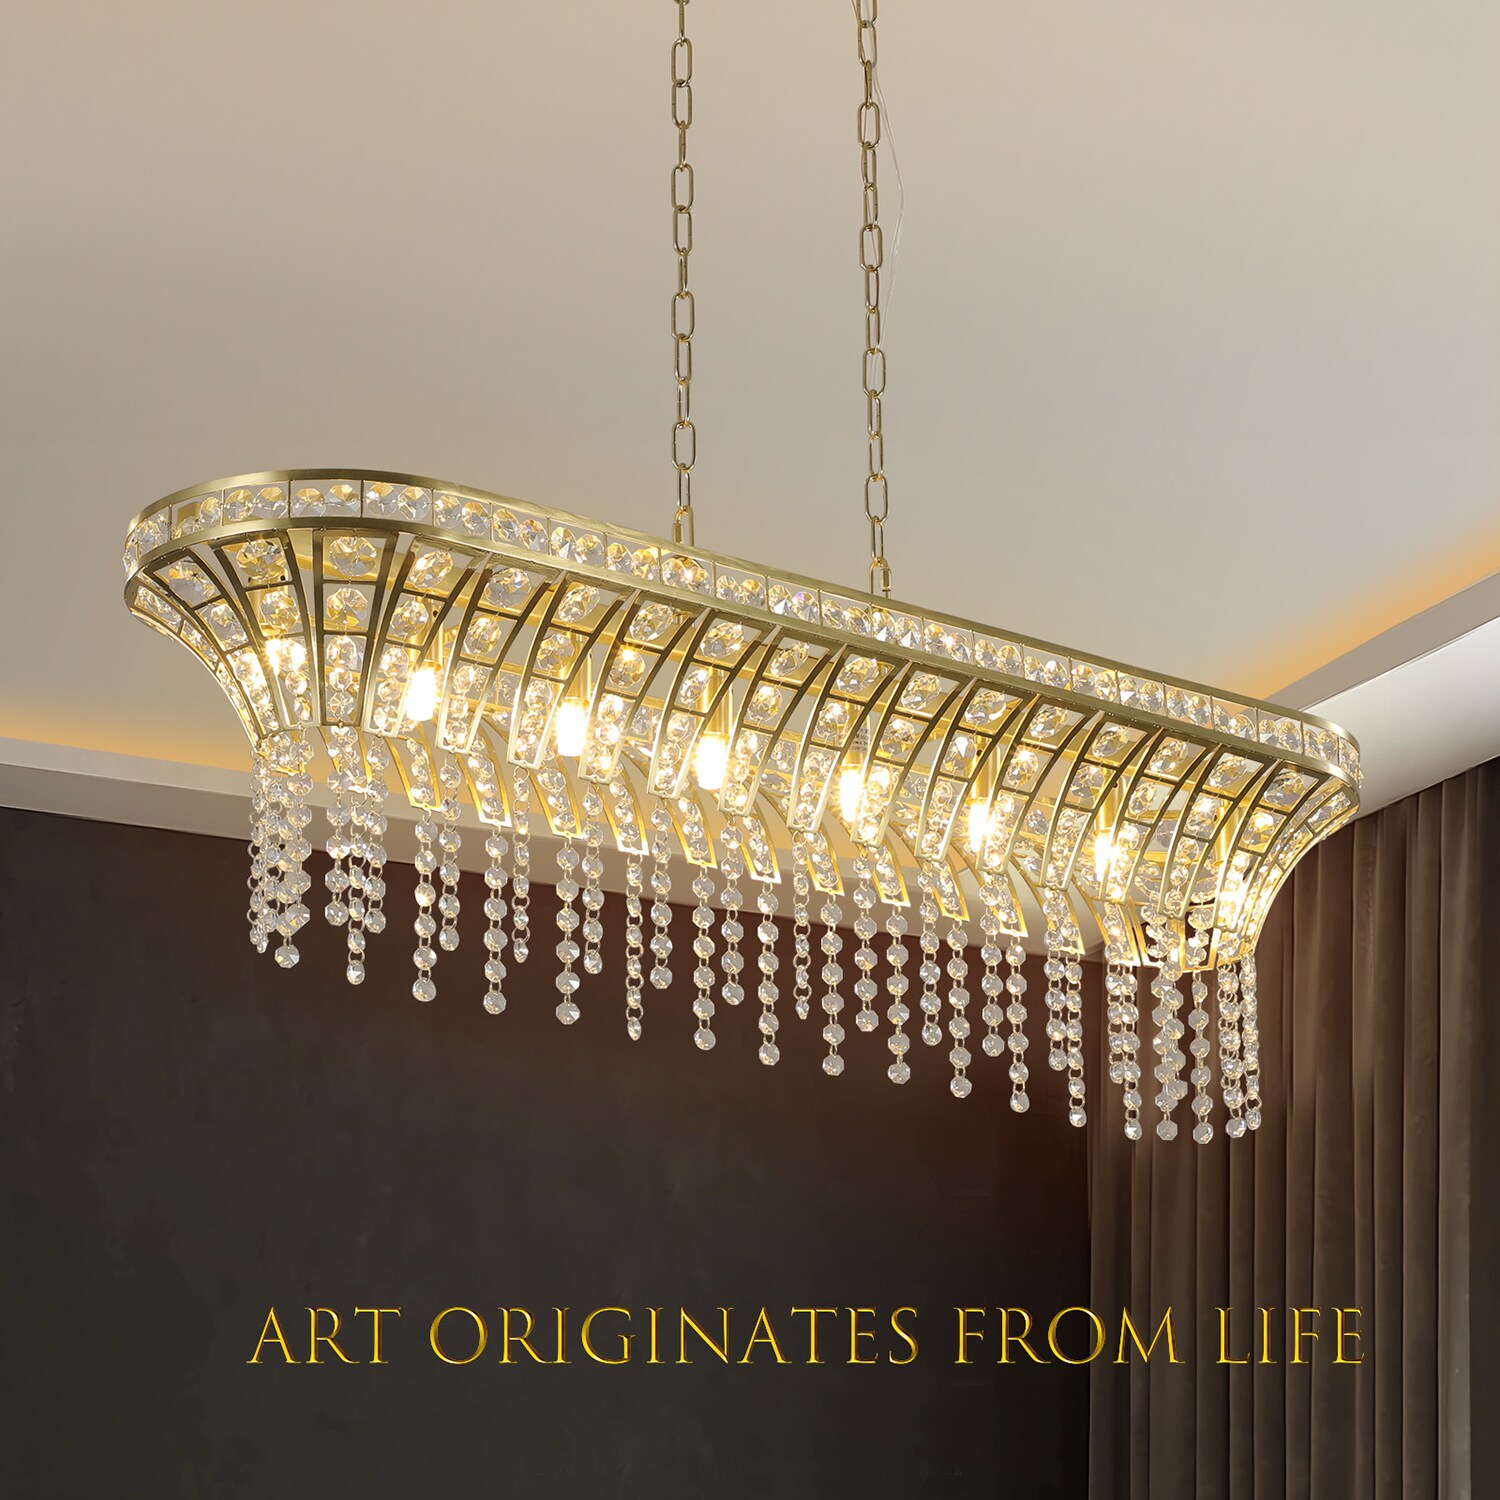 SINOFURN 8-Light Gold Tiffany LED Dry rated Chandelier at Lowes.com